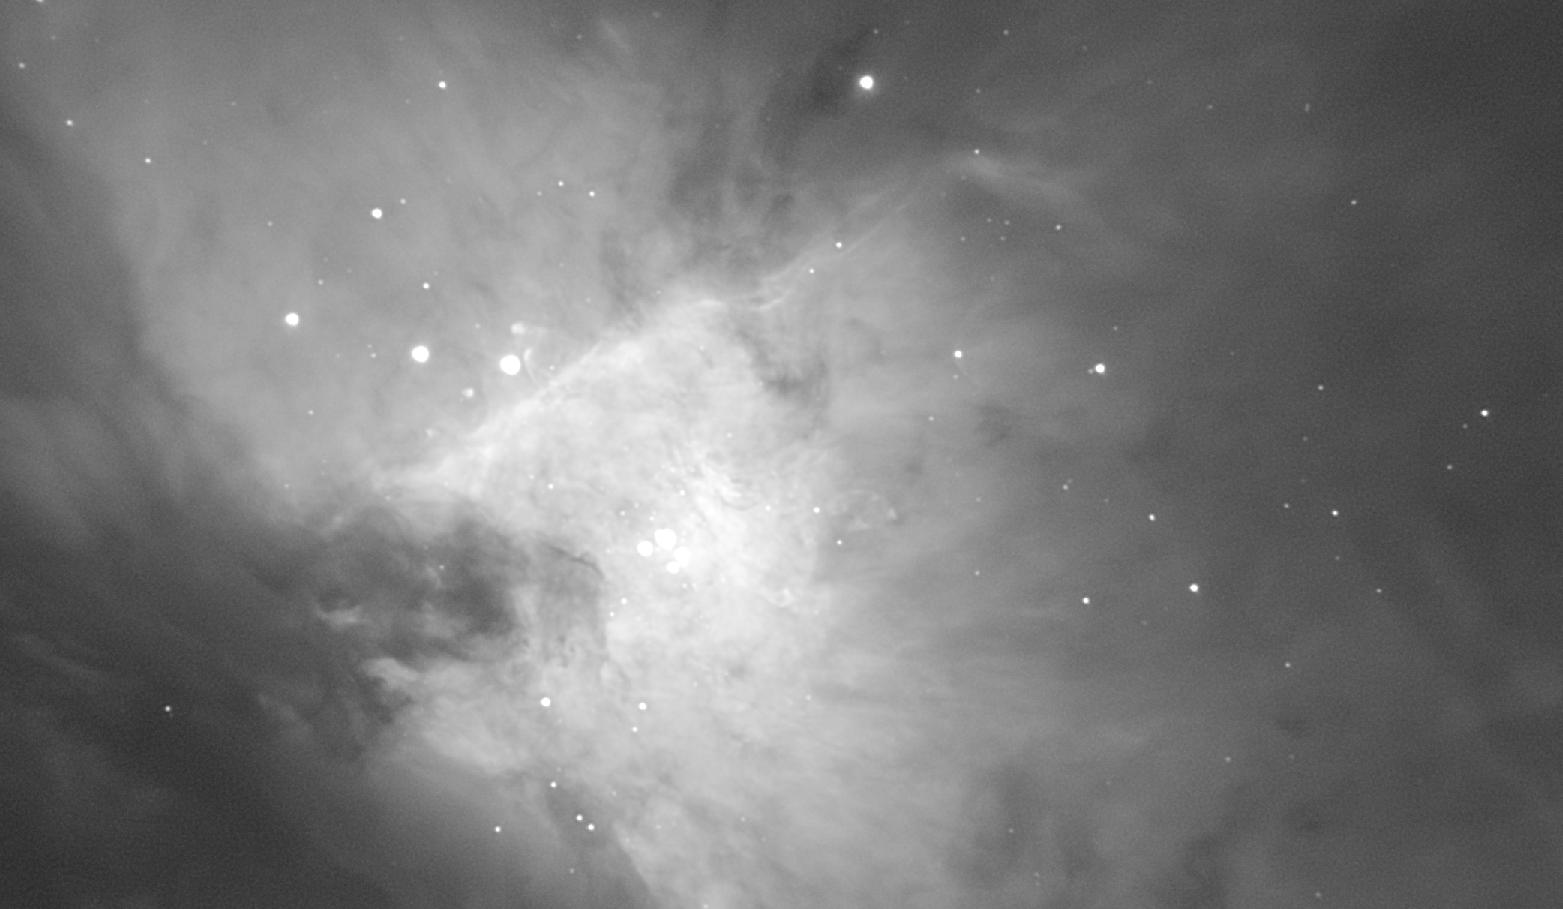 M42_deploy_a_zoom.png.756672179095ae37b12eb1e21e474d58.png